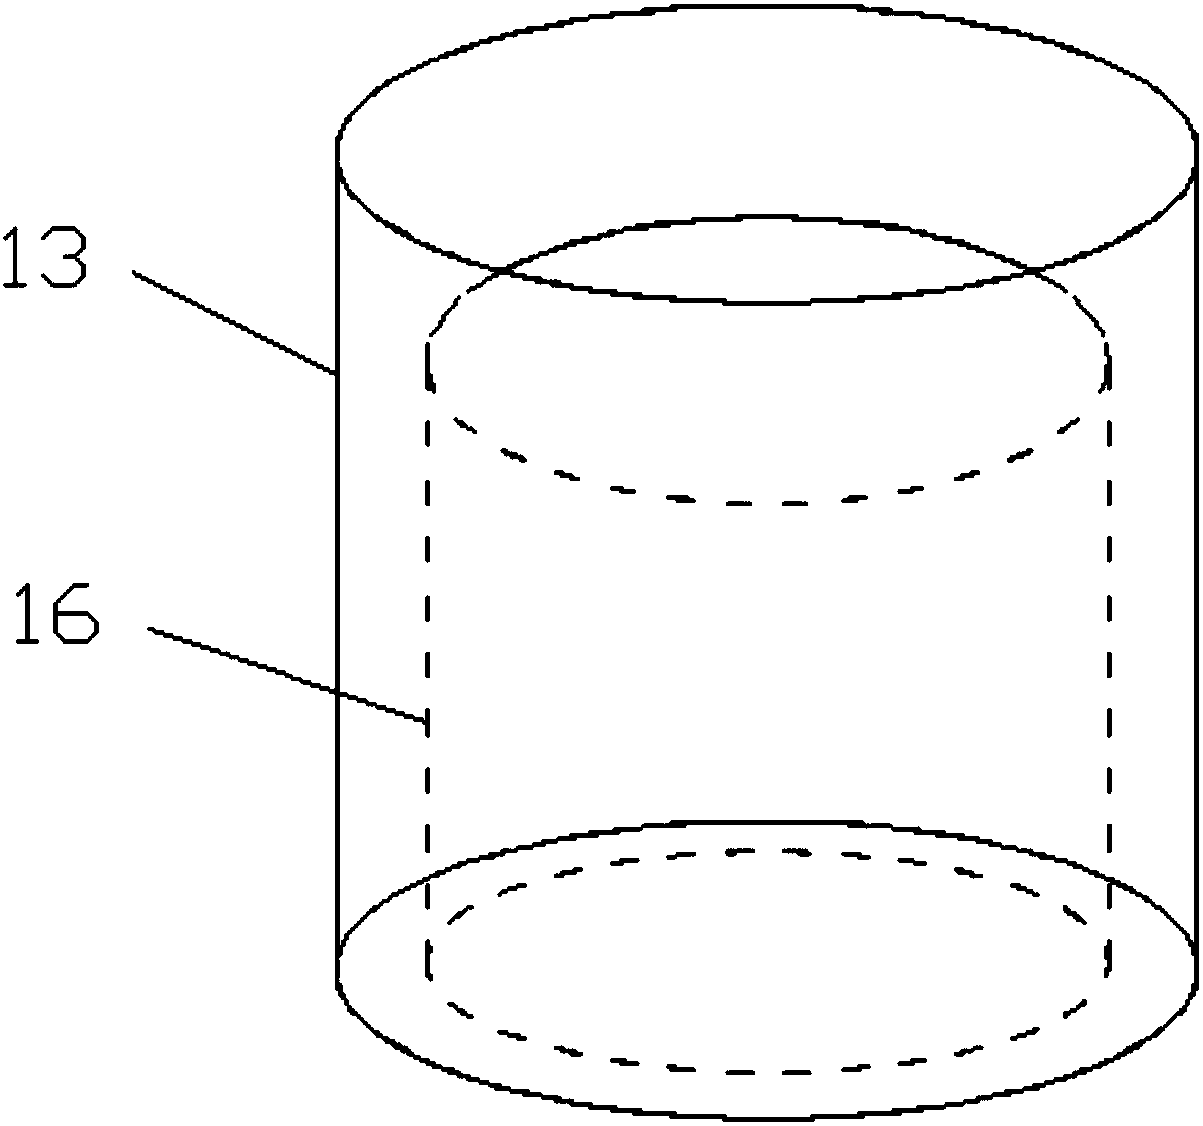 Oil storage tank with double-layer structure